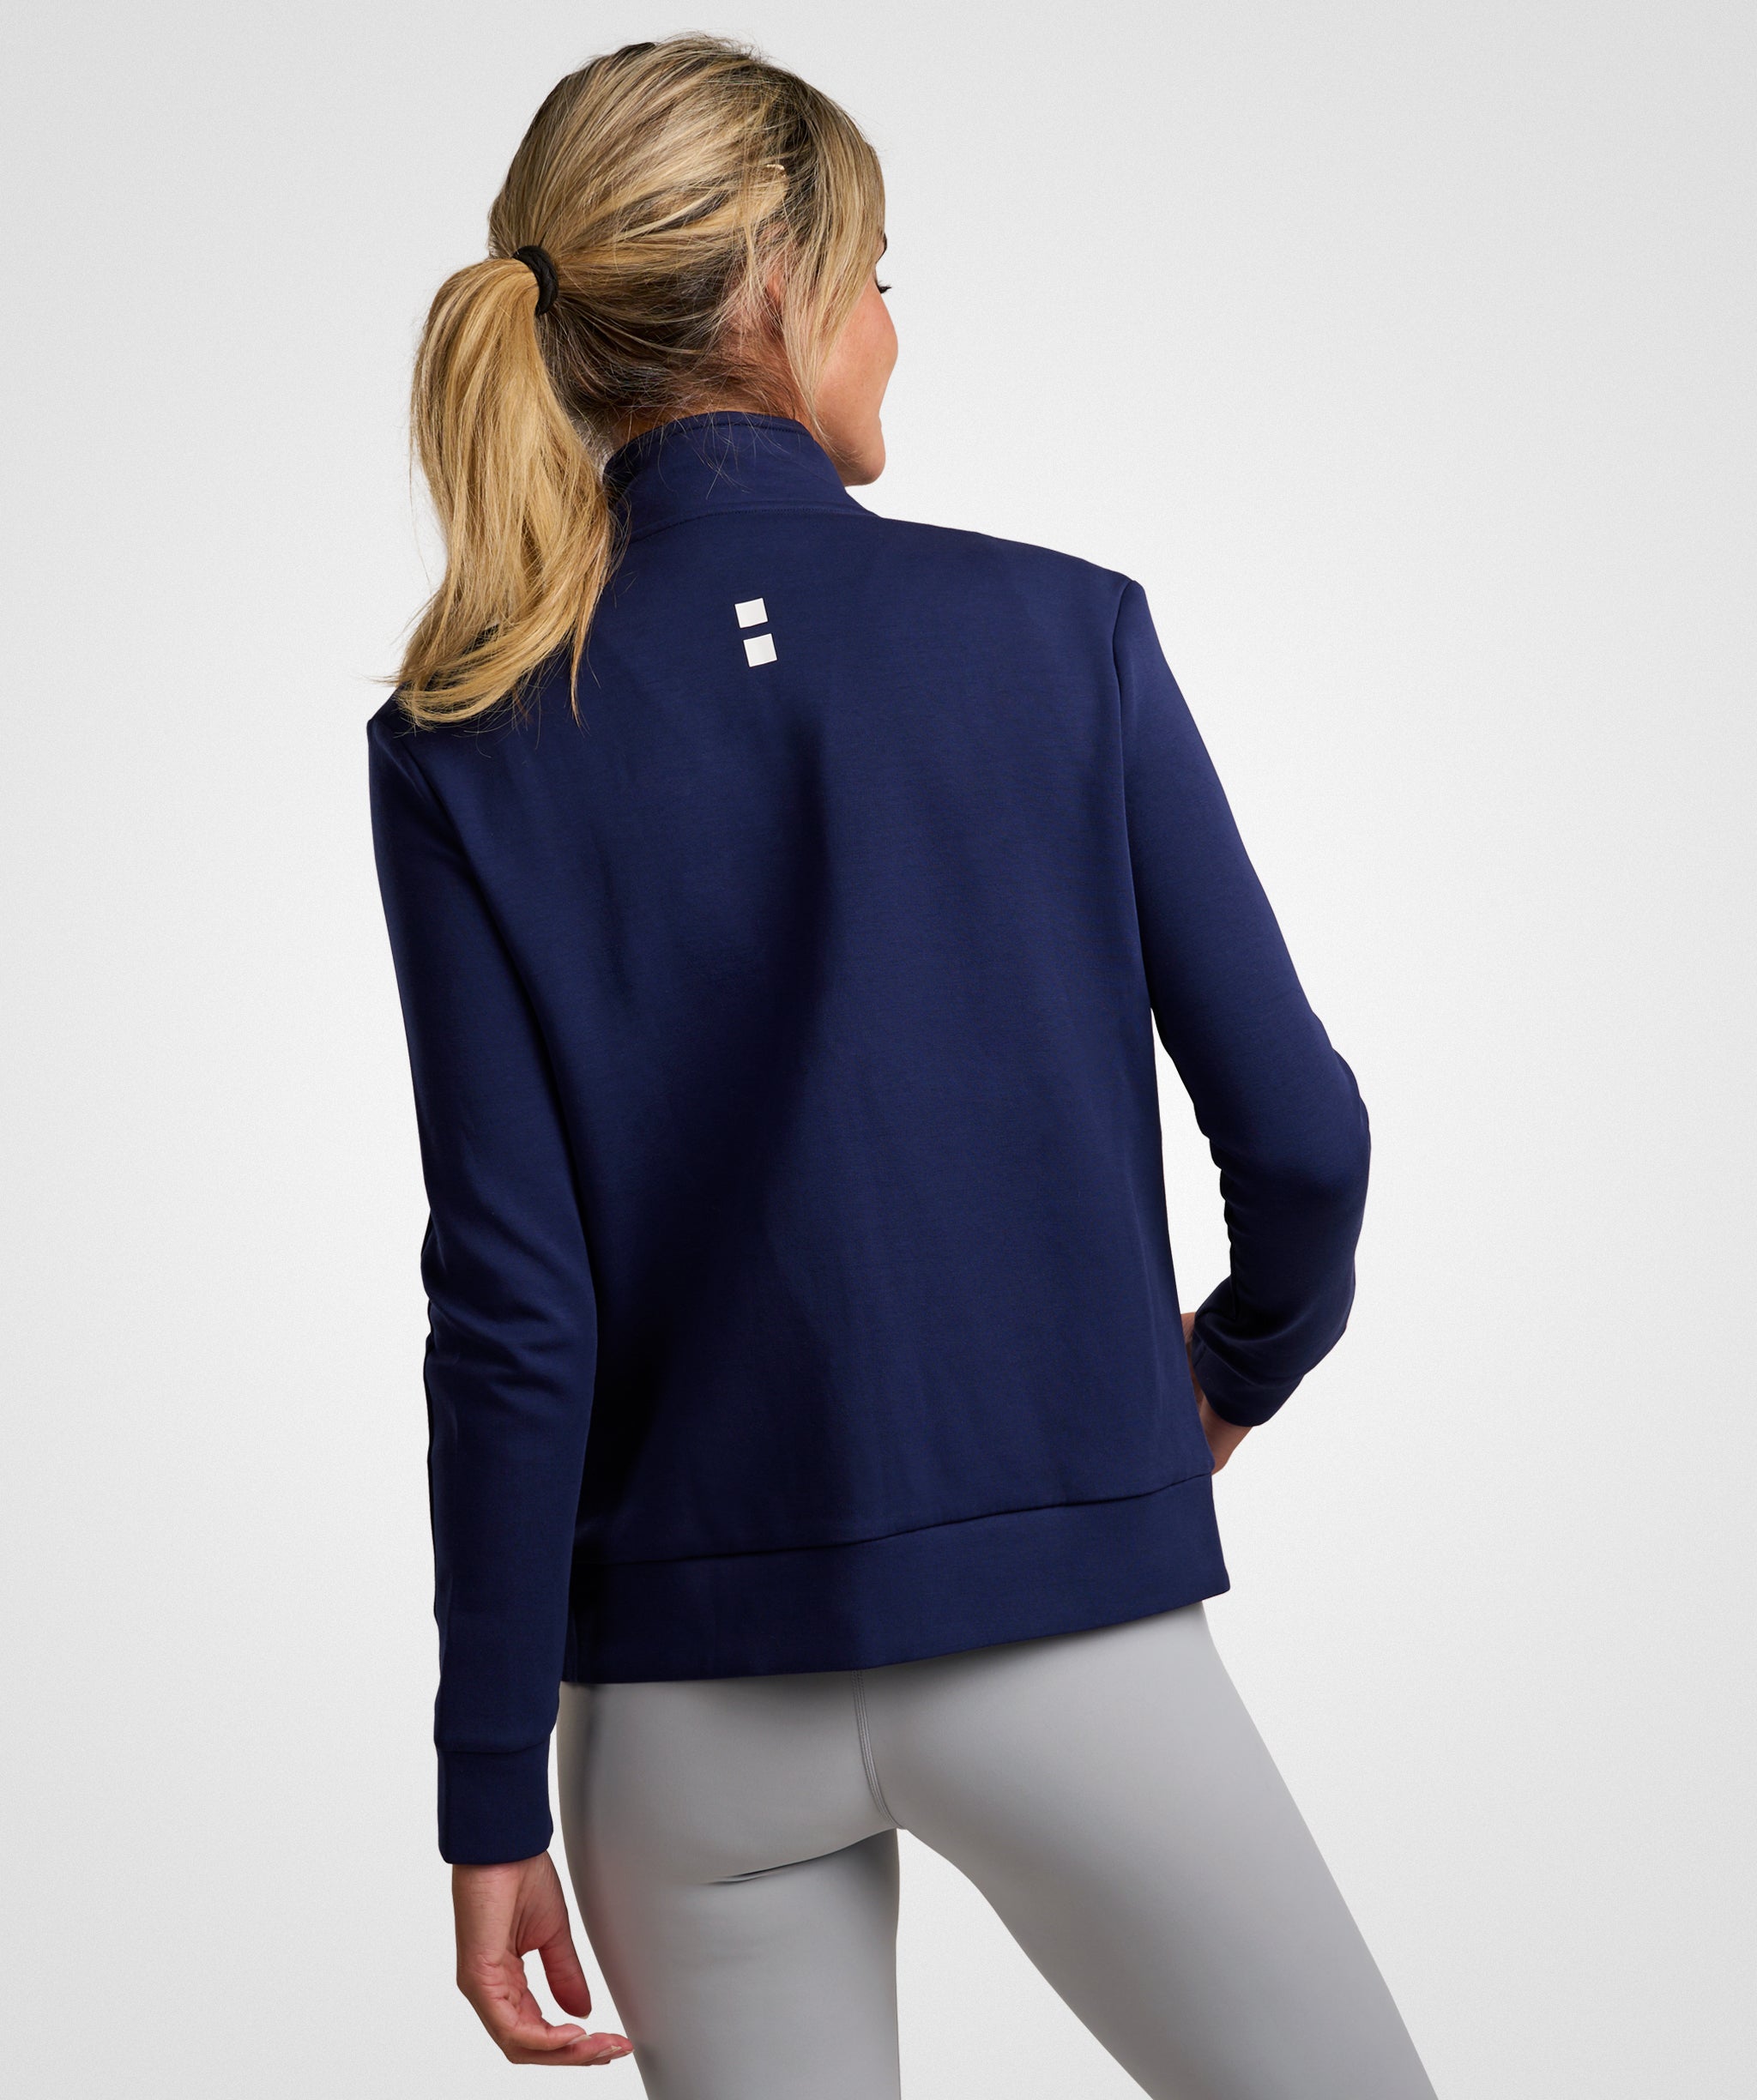 nordicdots women's navy jacket tennis padel fitness everyday outfit nordicdots.com